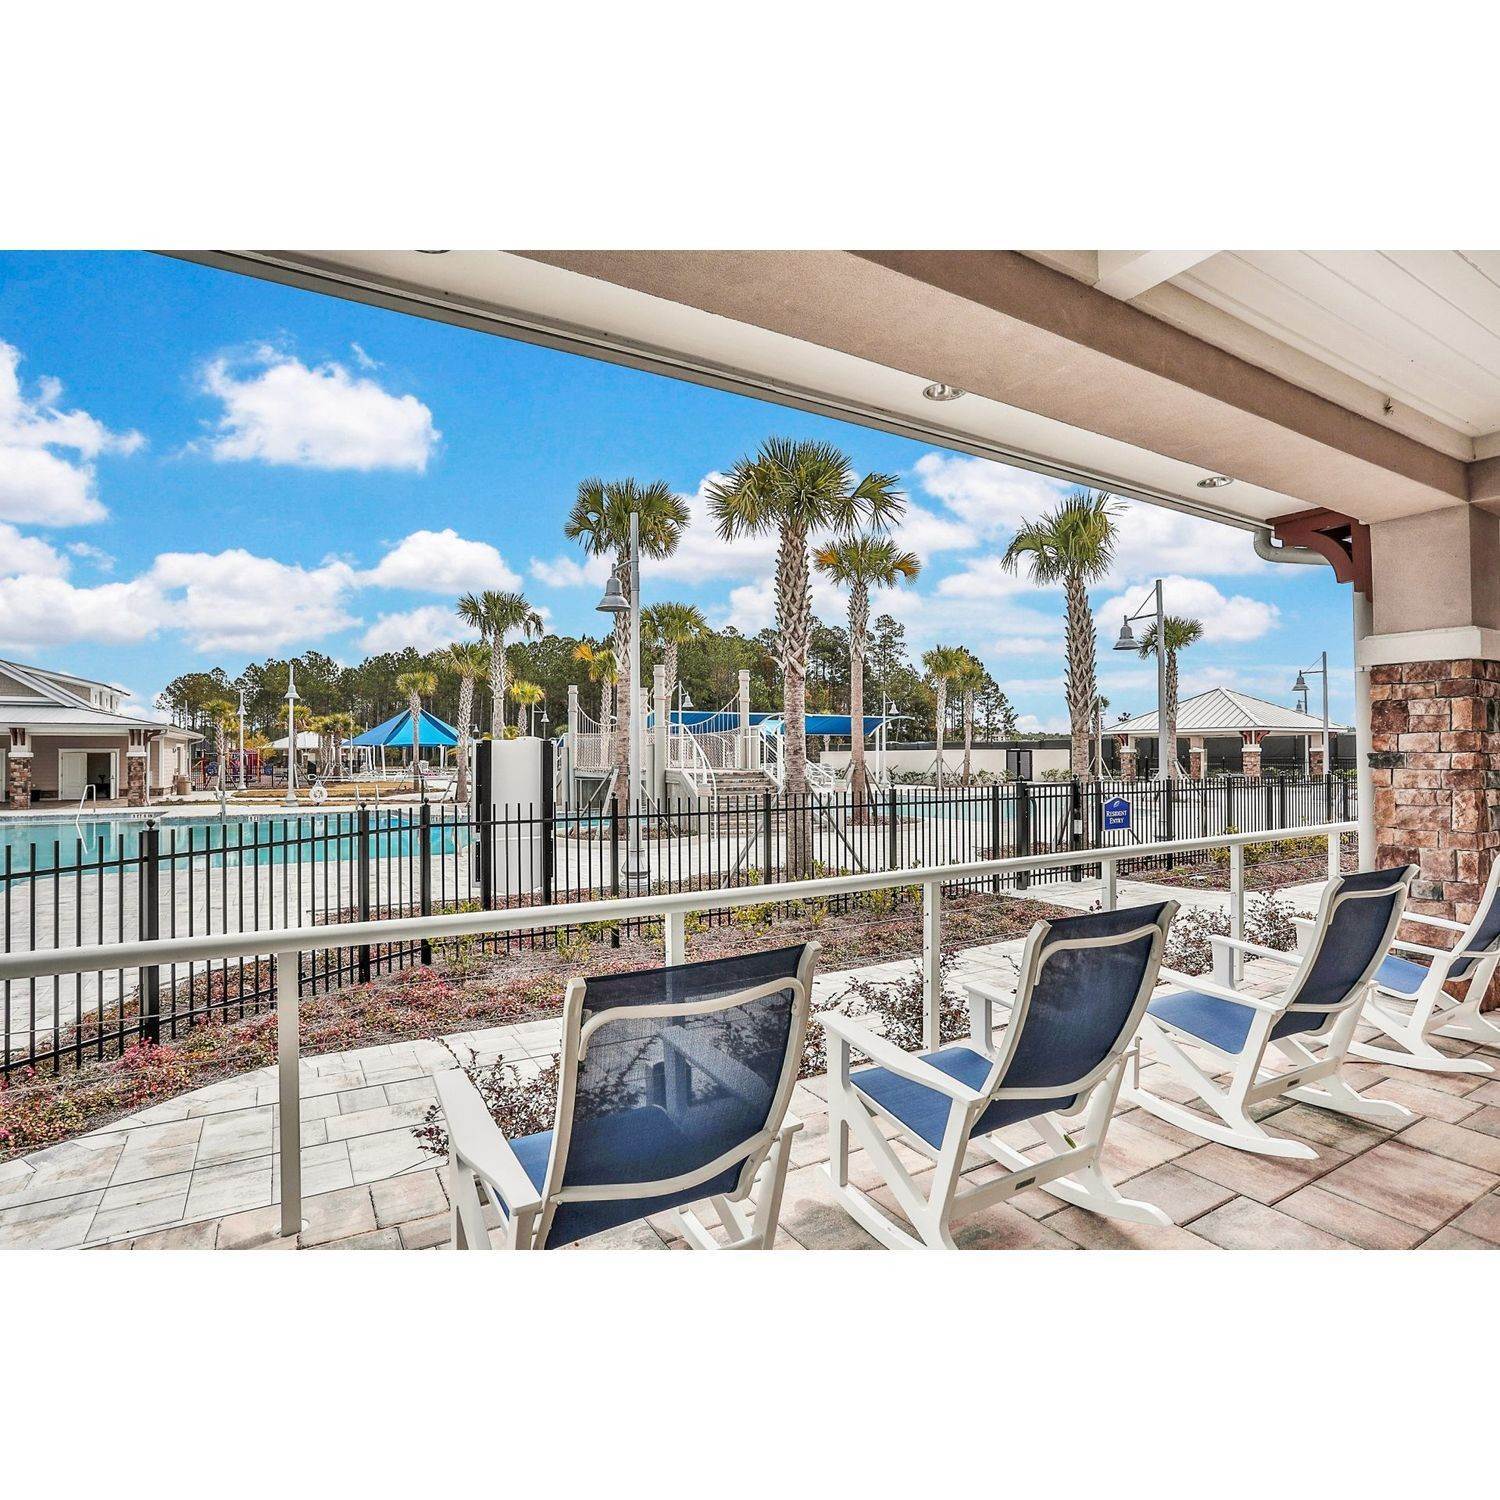 11. Silver Landing at SilverLeaf xây dựng tại 24 Goldcrest Way, St. Augustine, FL 32092